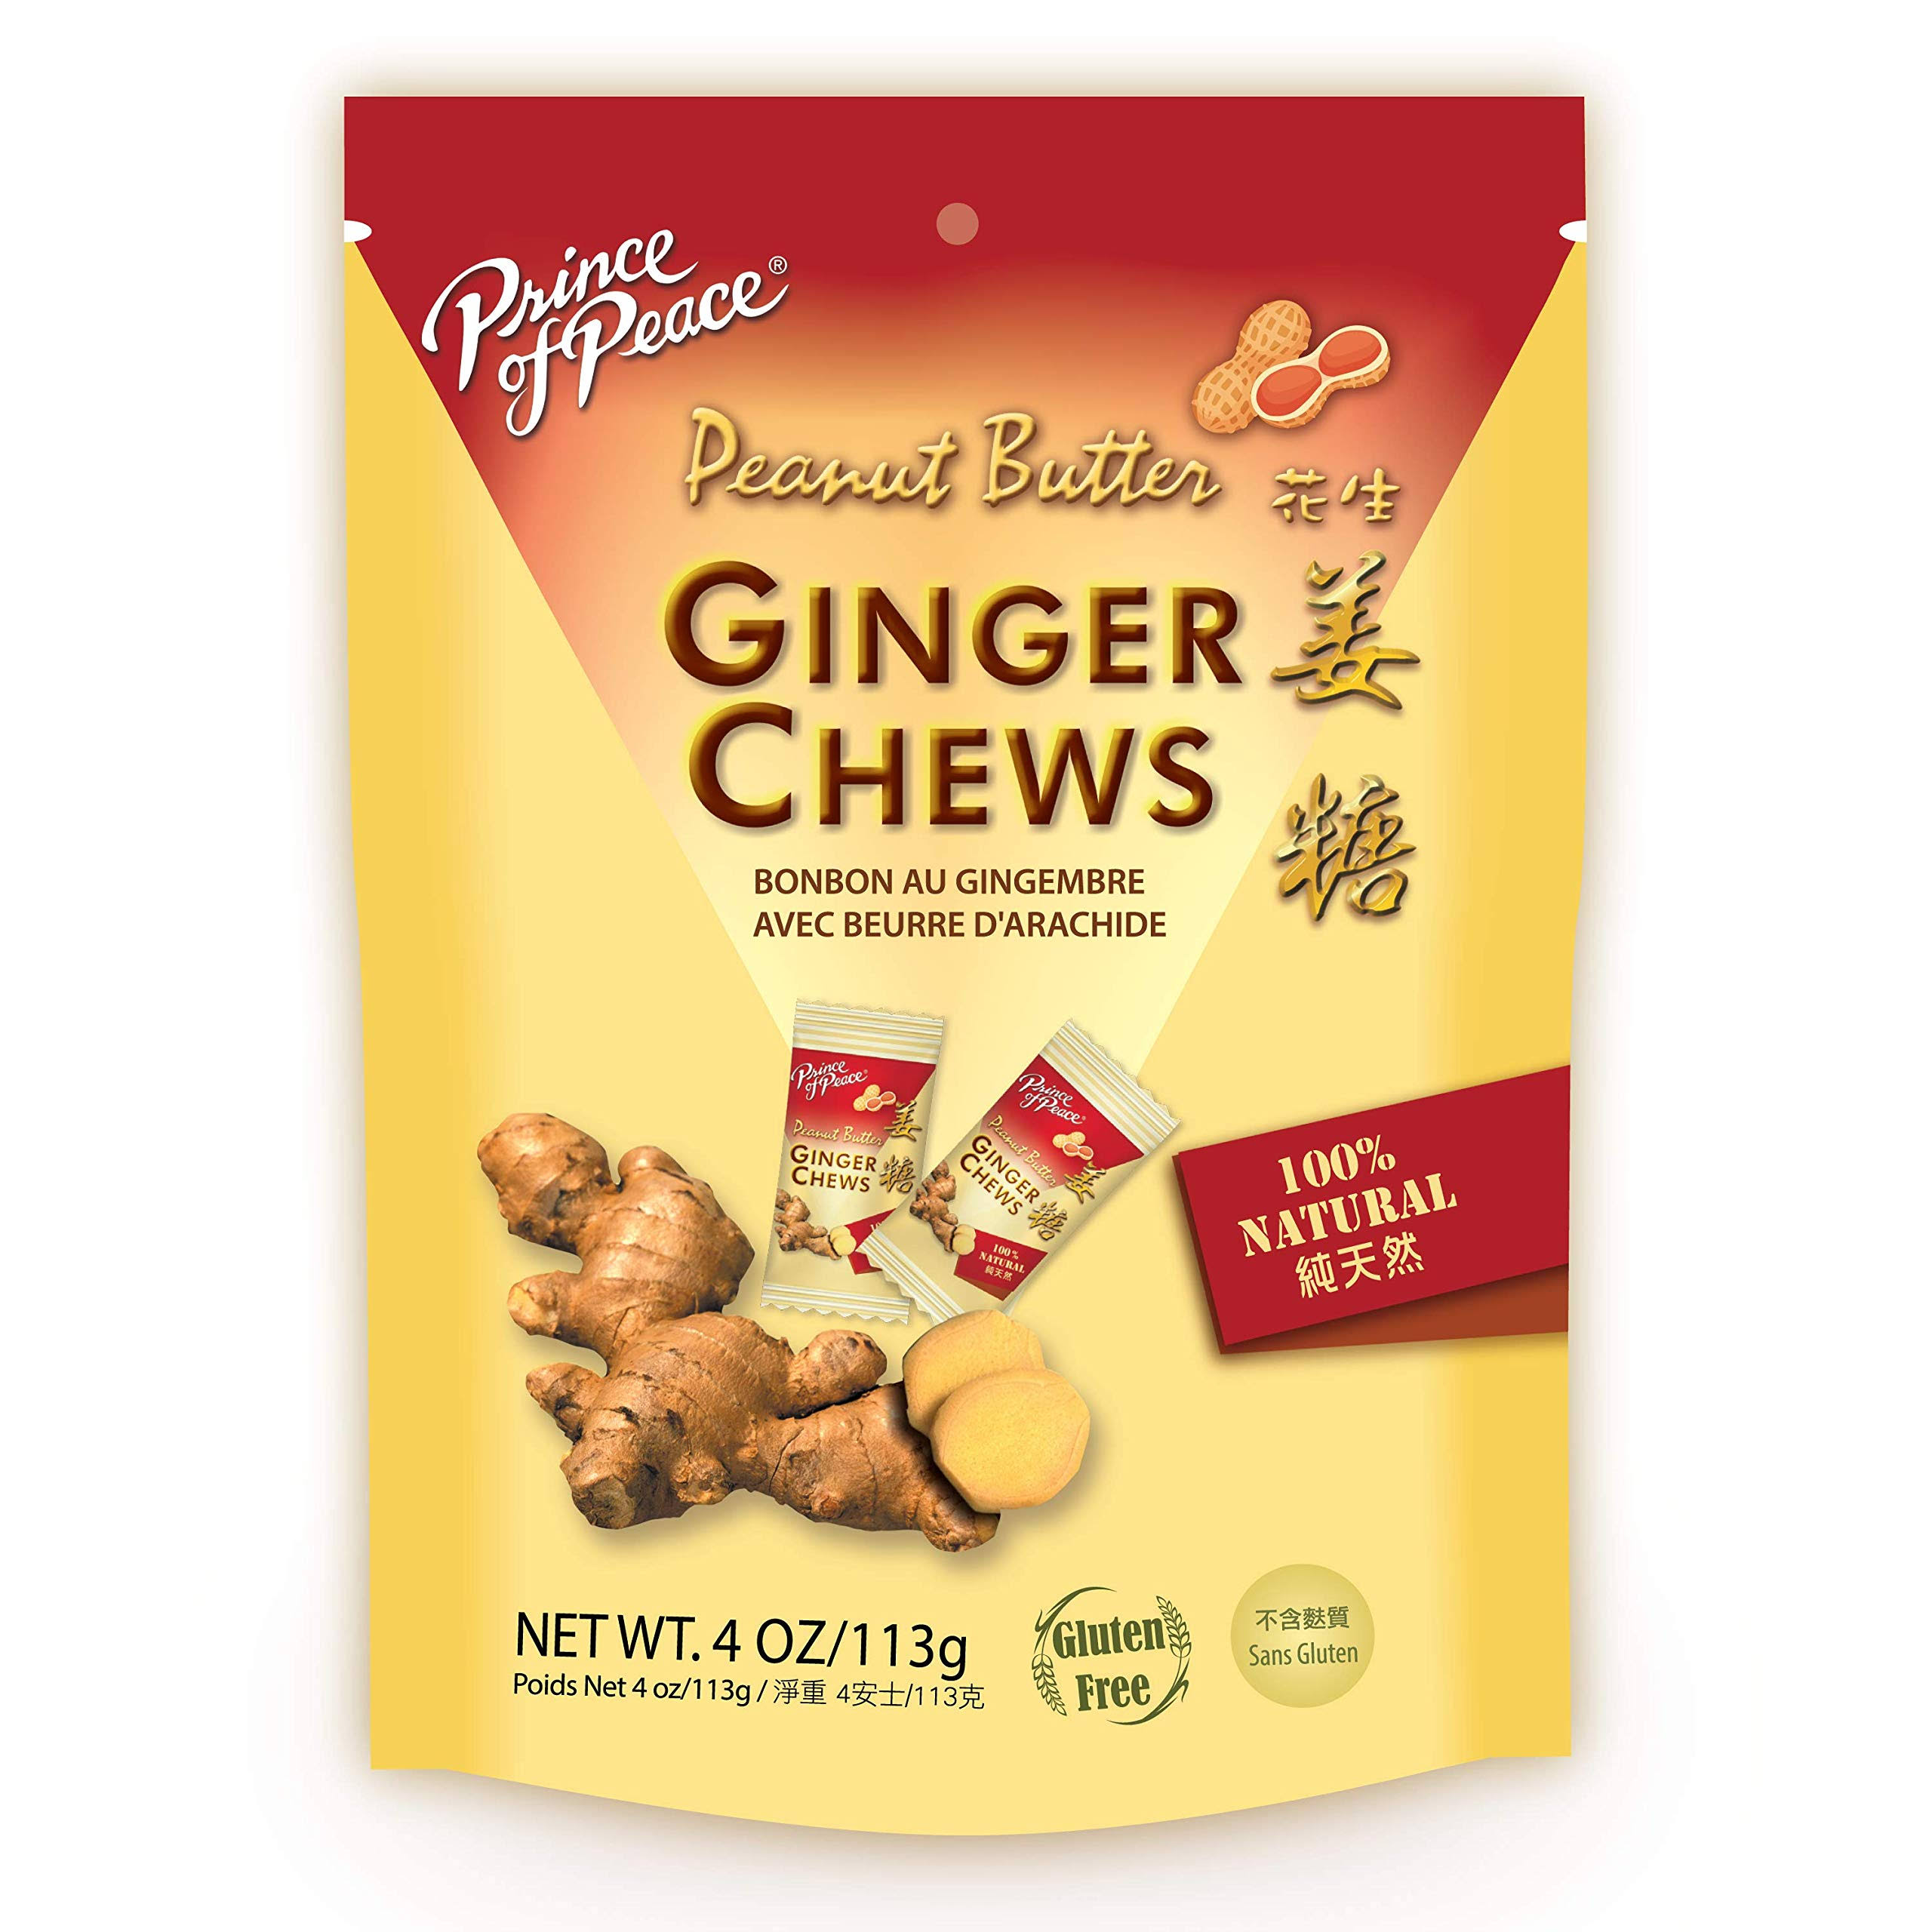 Prince of Peace 235604 Peanut Butter Ginger Chews 4 oz. Bag